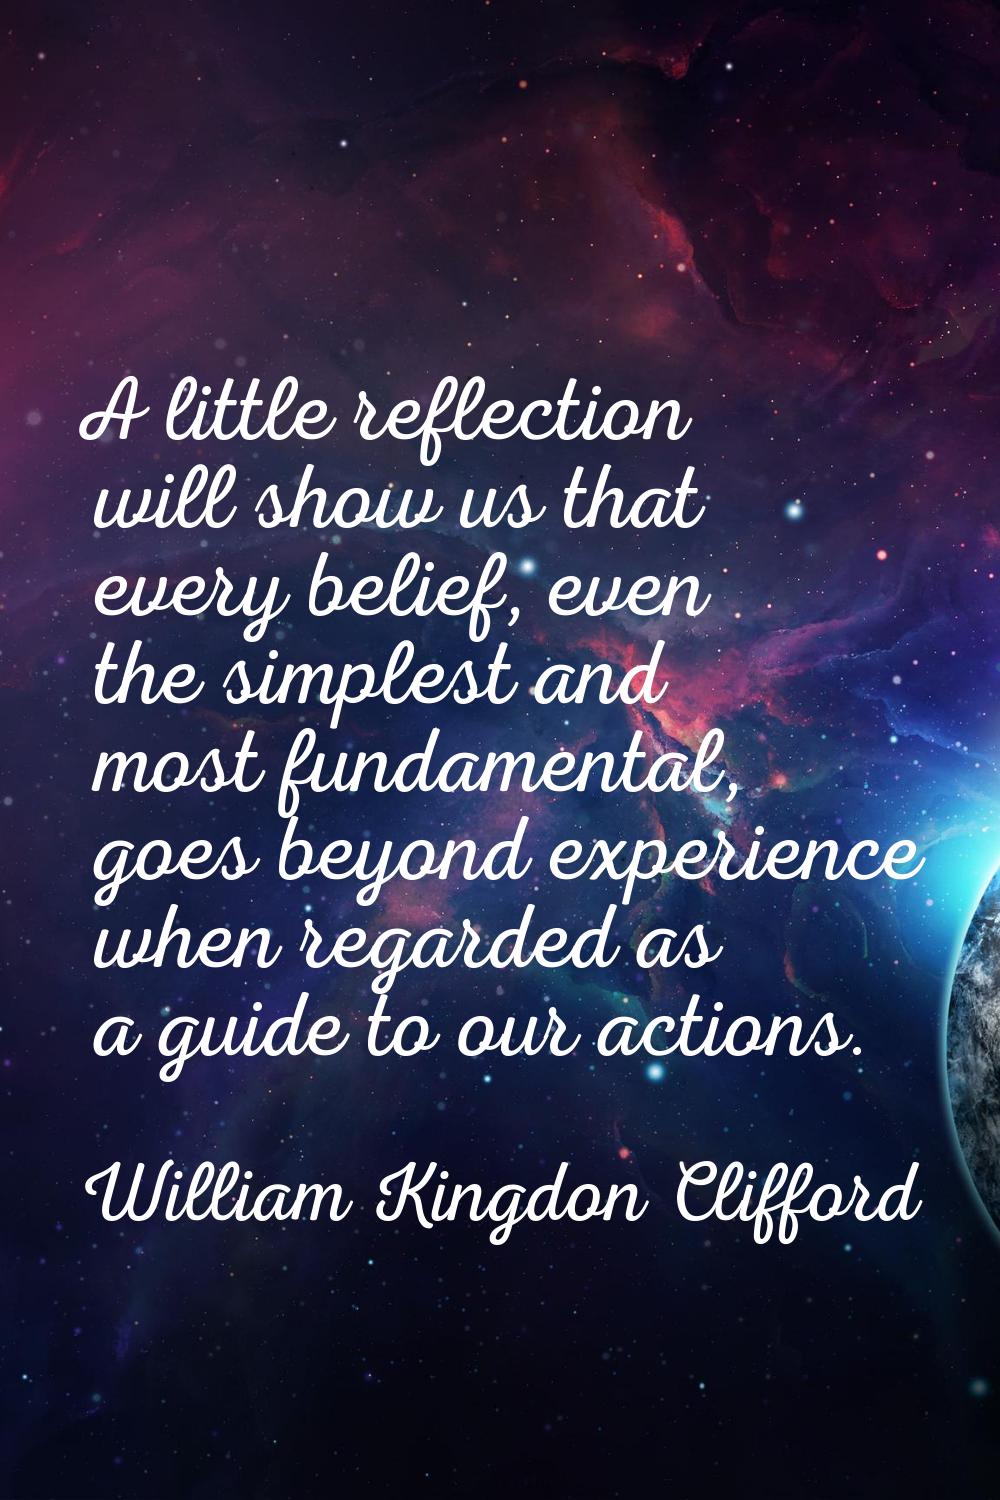 A little reflection will show us that every belief, even the simplest and most fundamental, goes be